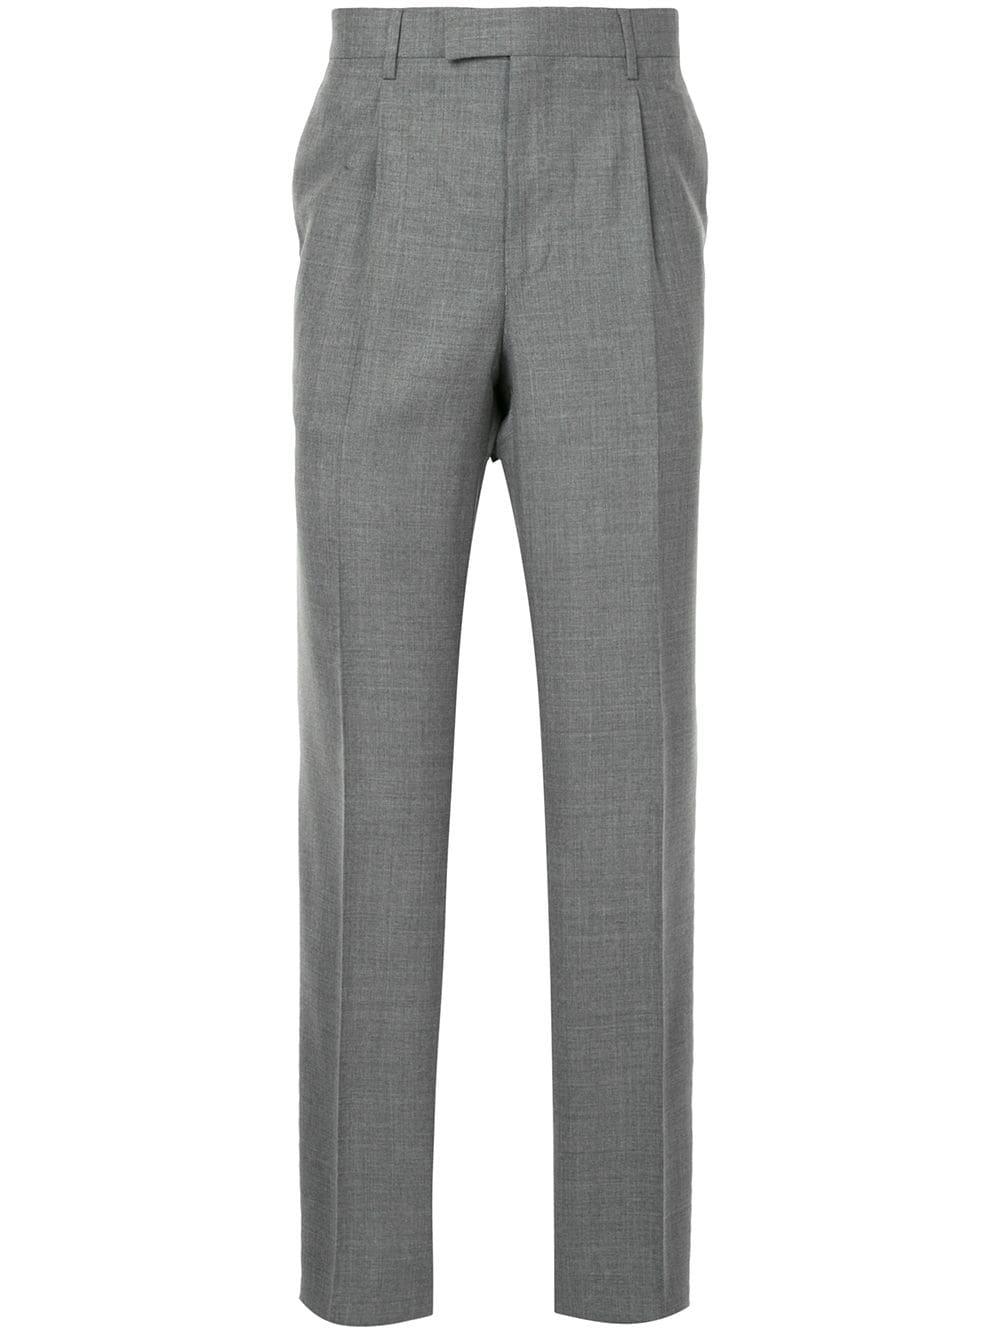 Gieves & Hawkes Wool Tailored Trousers in Grey (Gray) for Men - Lyst